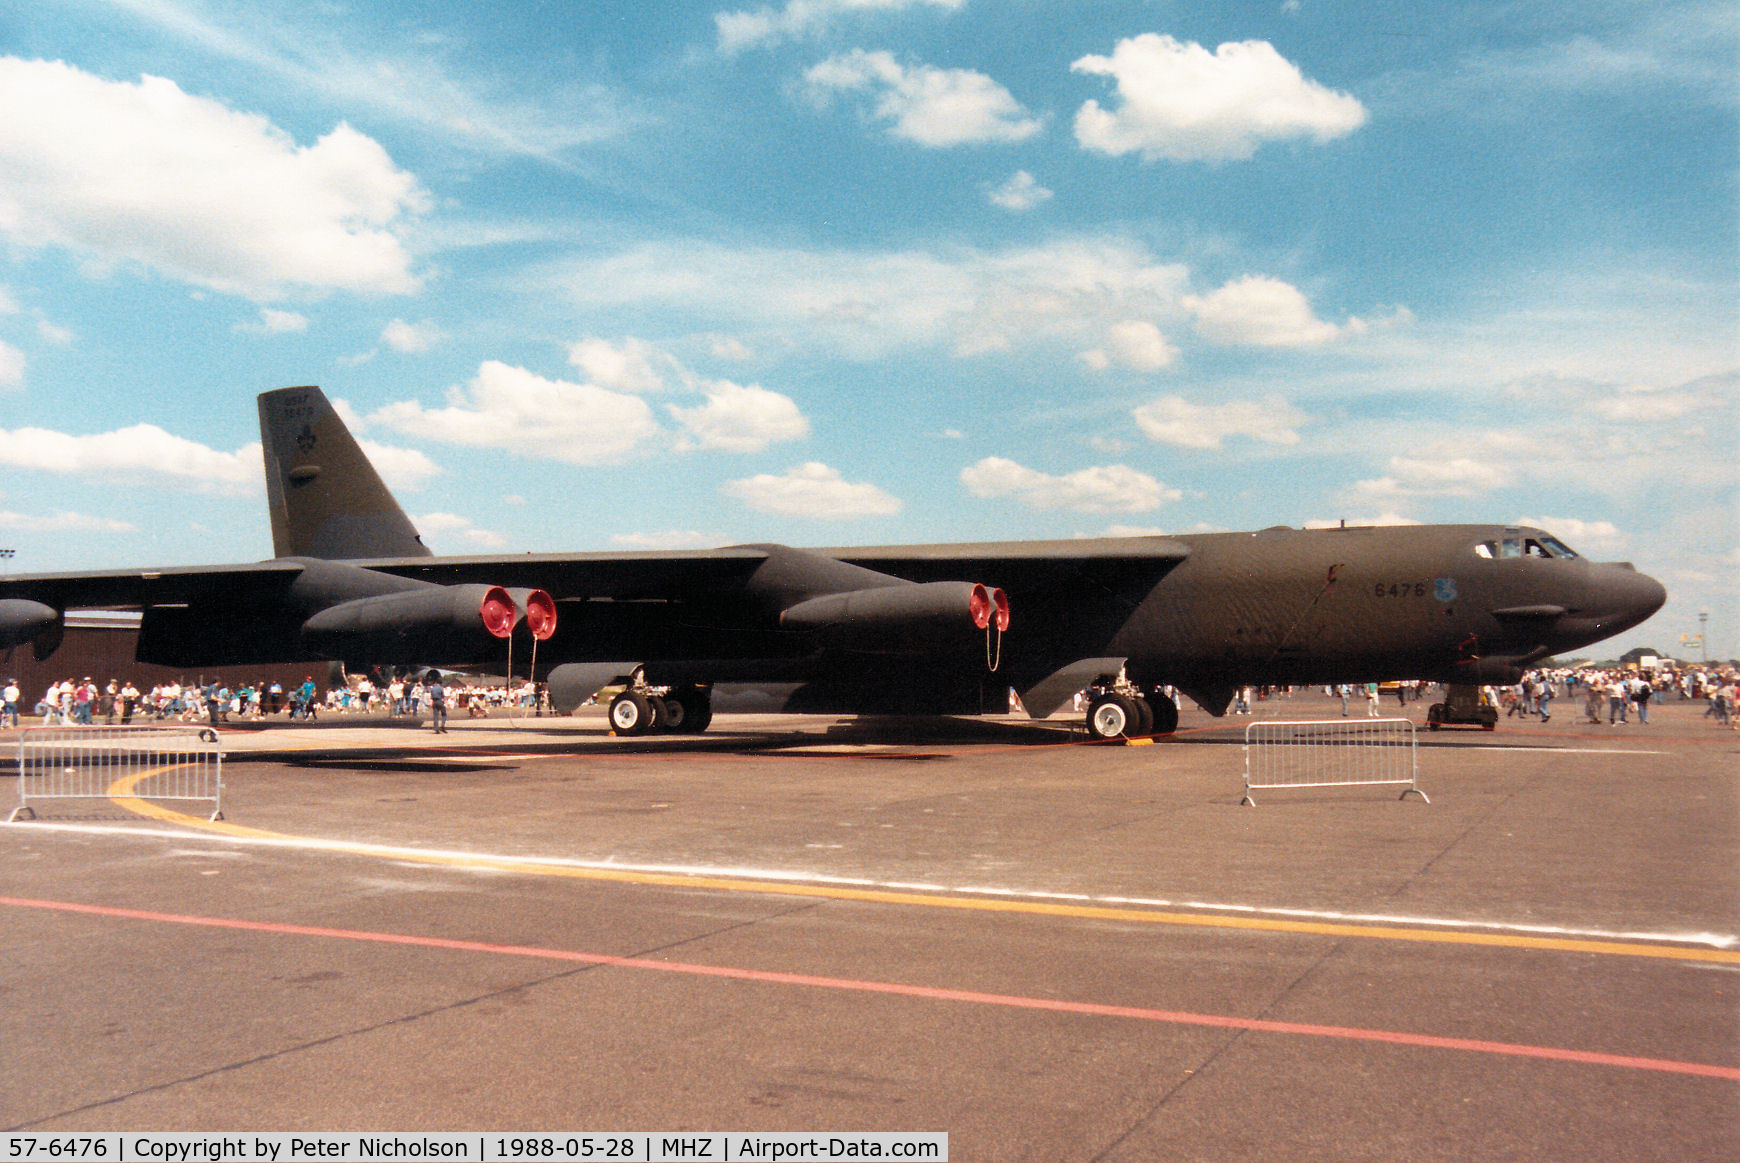 57-6476, 1957 Boeing B-52G Stratofortress C/N 464181, B-52G Stratofortress of Barksdale AFB's 2nd Bombardment Wing on display at the 1988 RAF Mildenhall Air Fete.